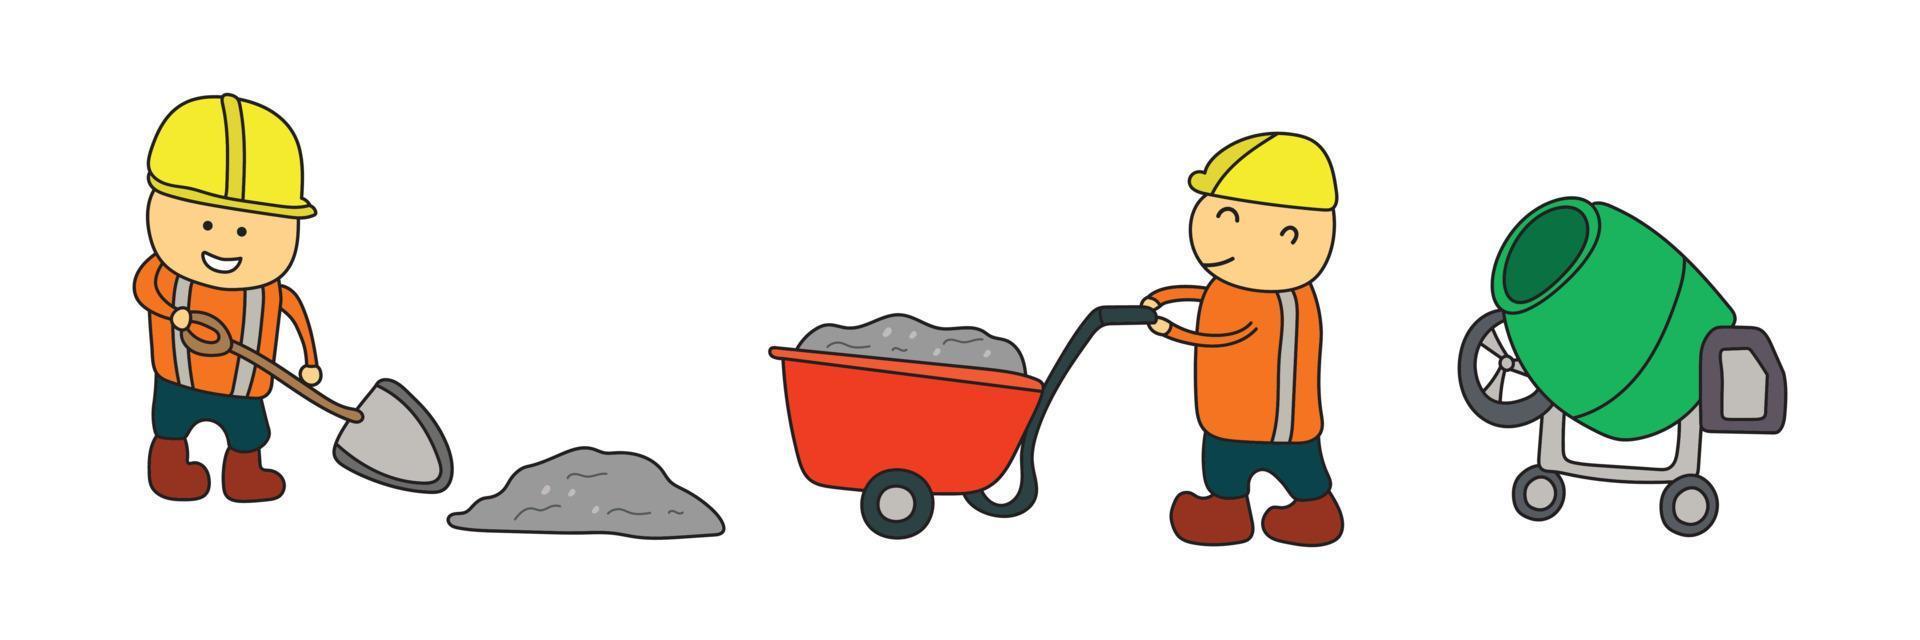 Kids drawing vector Illustration of construction workers preparing concrete with cement mixer in a cartoon style